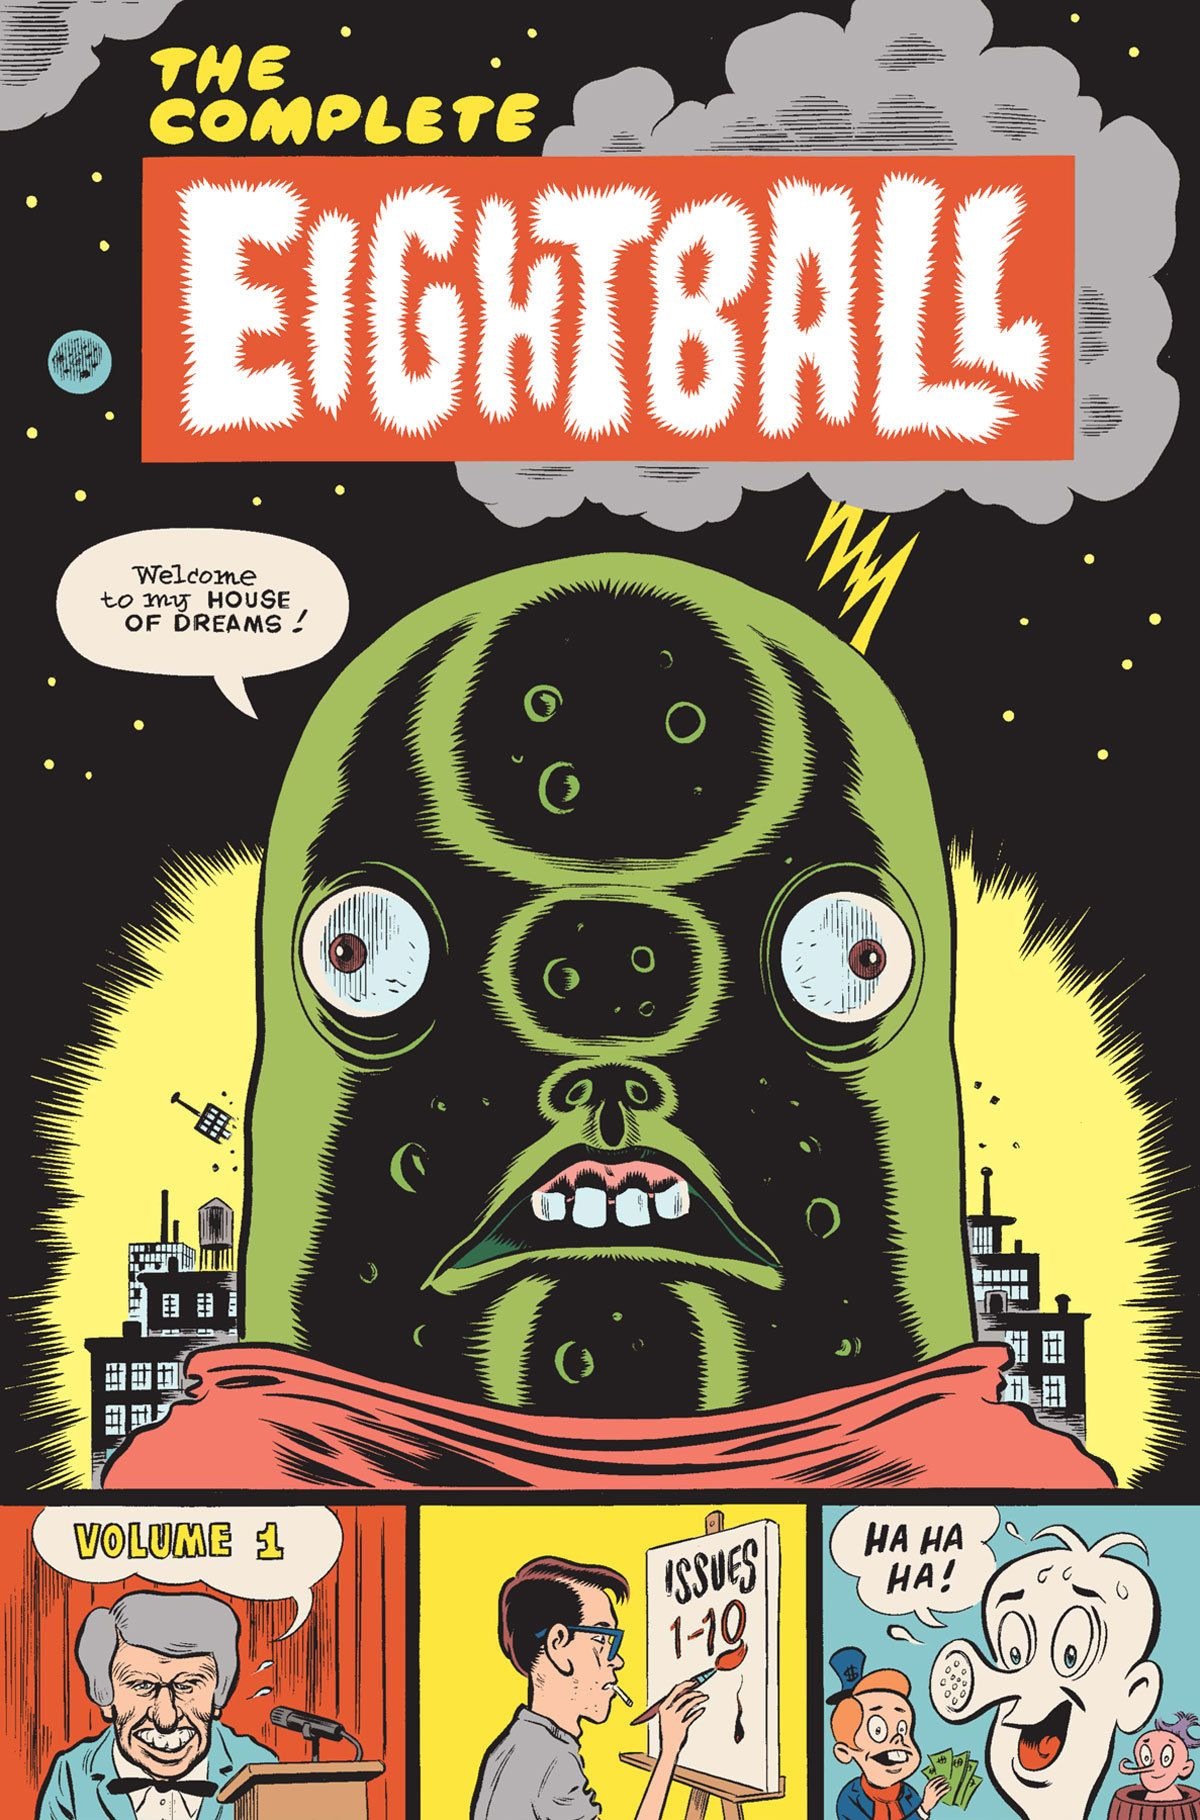 daniel clowes body image 1422612809 Nice Art: Clowes cover for The Complete Eightball is revealed